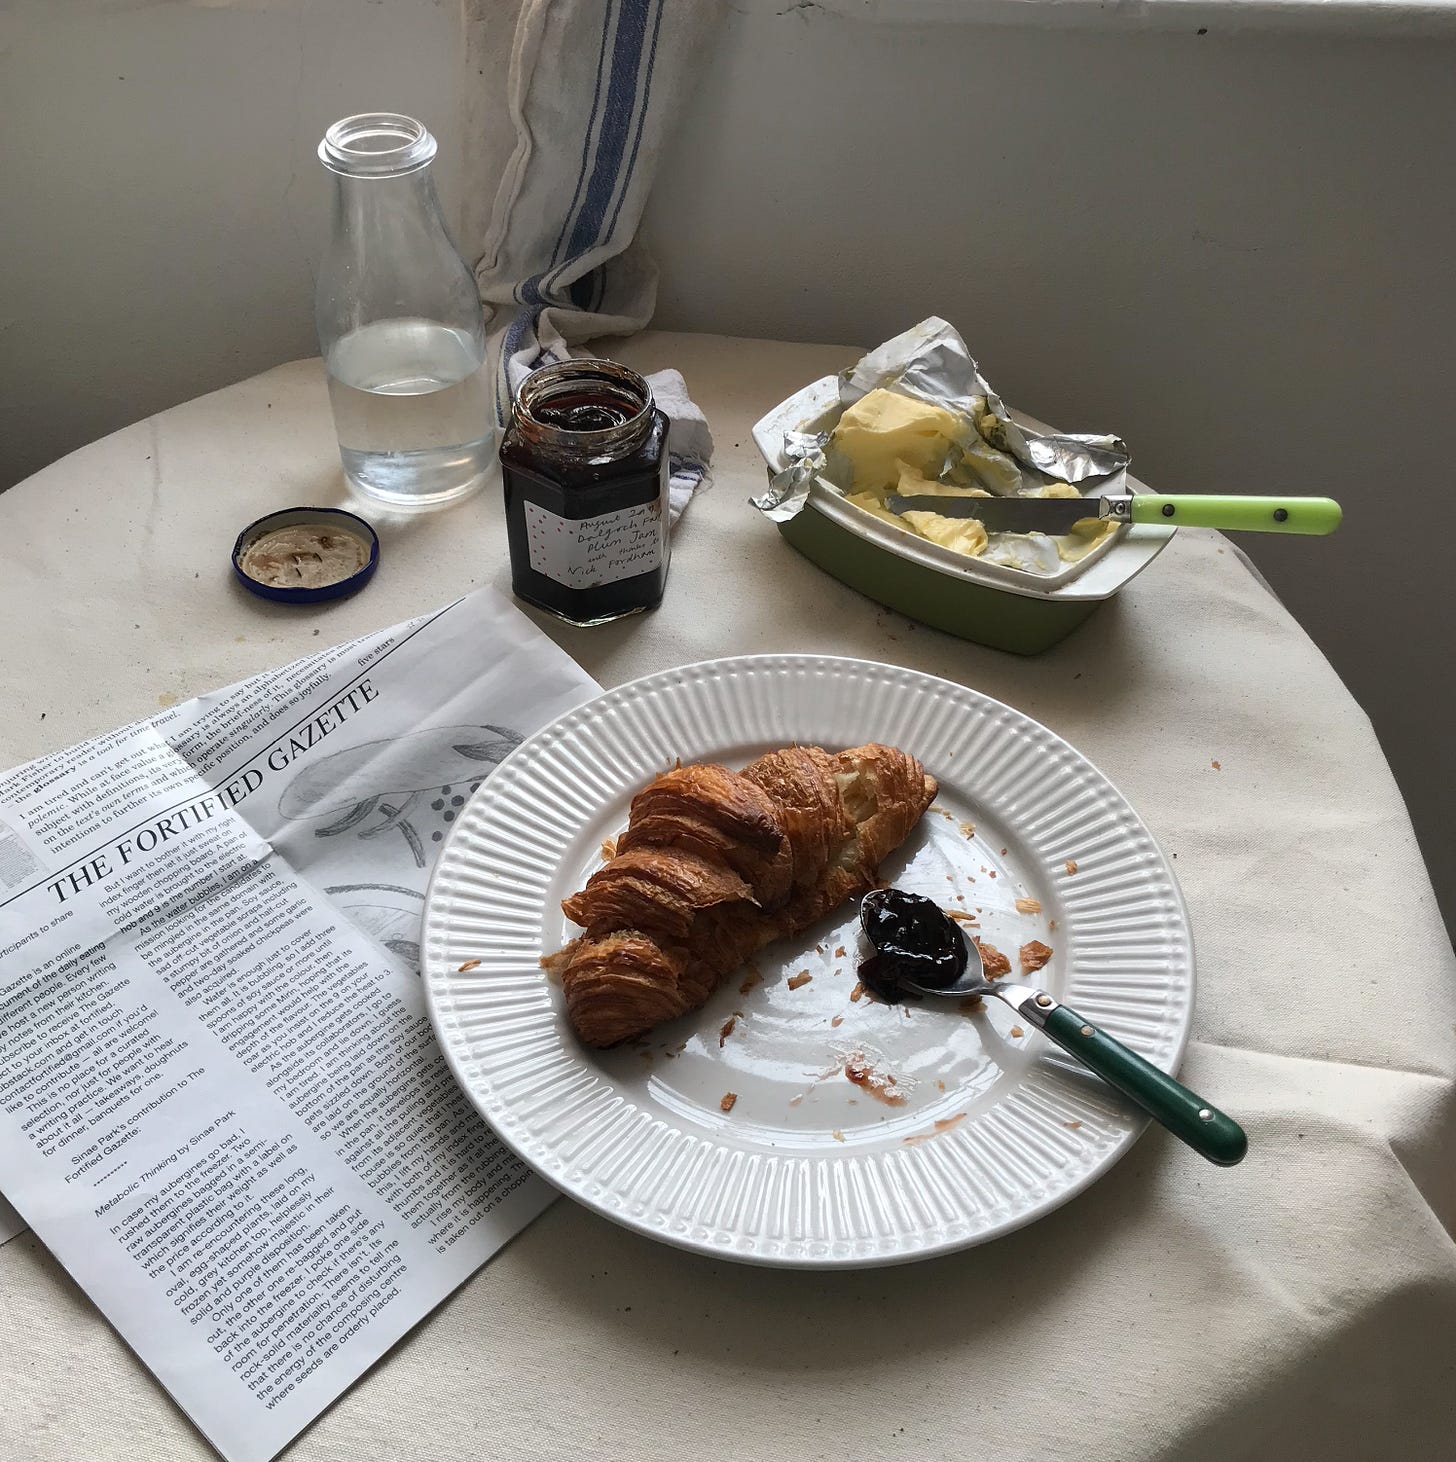 The same round table, set, but earlier, with the croissant intact, and a spoon, full of jam, beside on the plate. In the butter dish, a knife is askew.